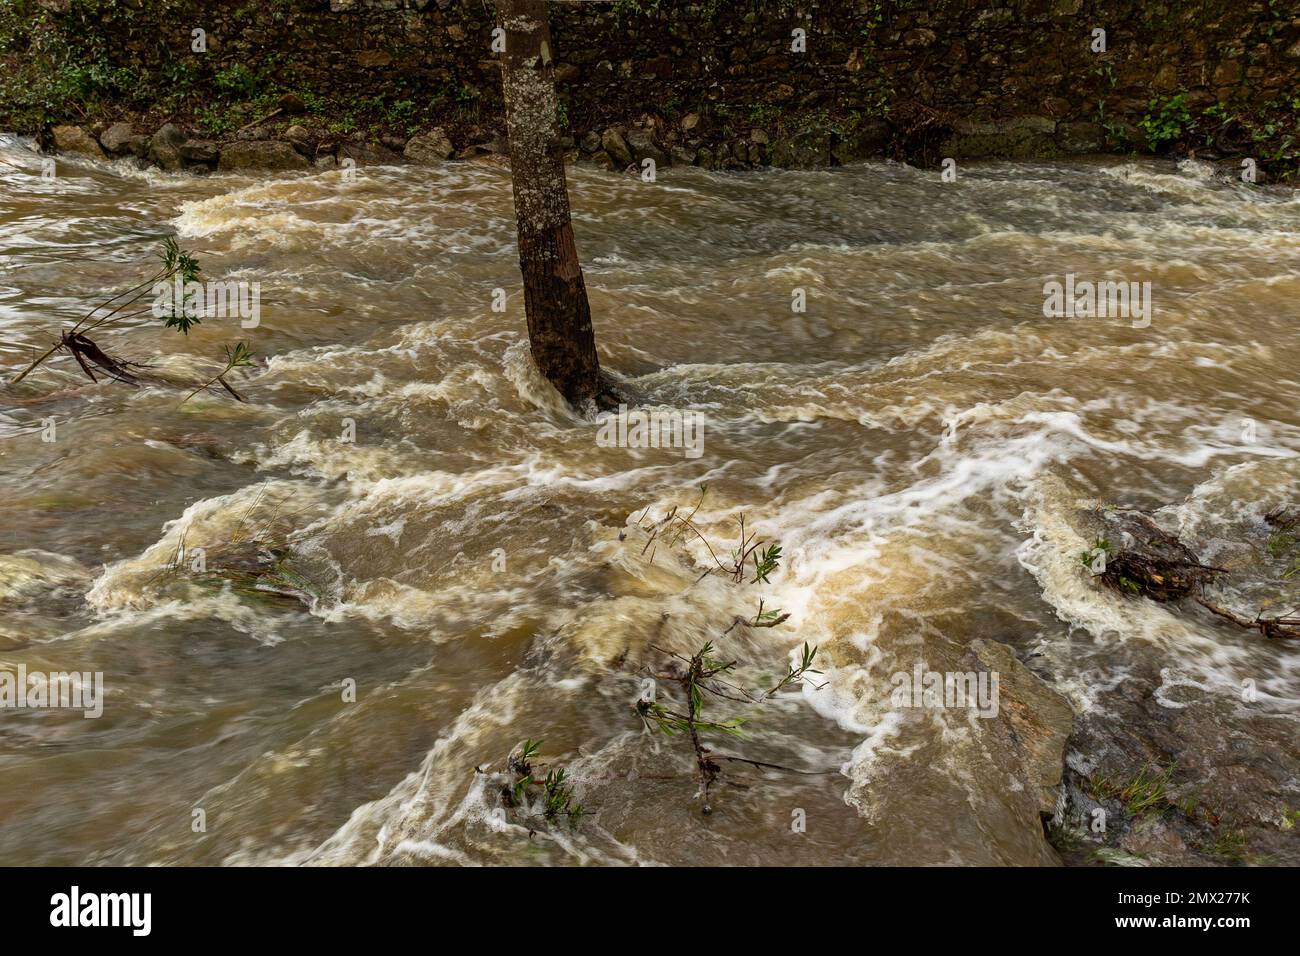 View of the Heavy rains creating high flow brown river water in